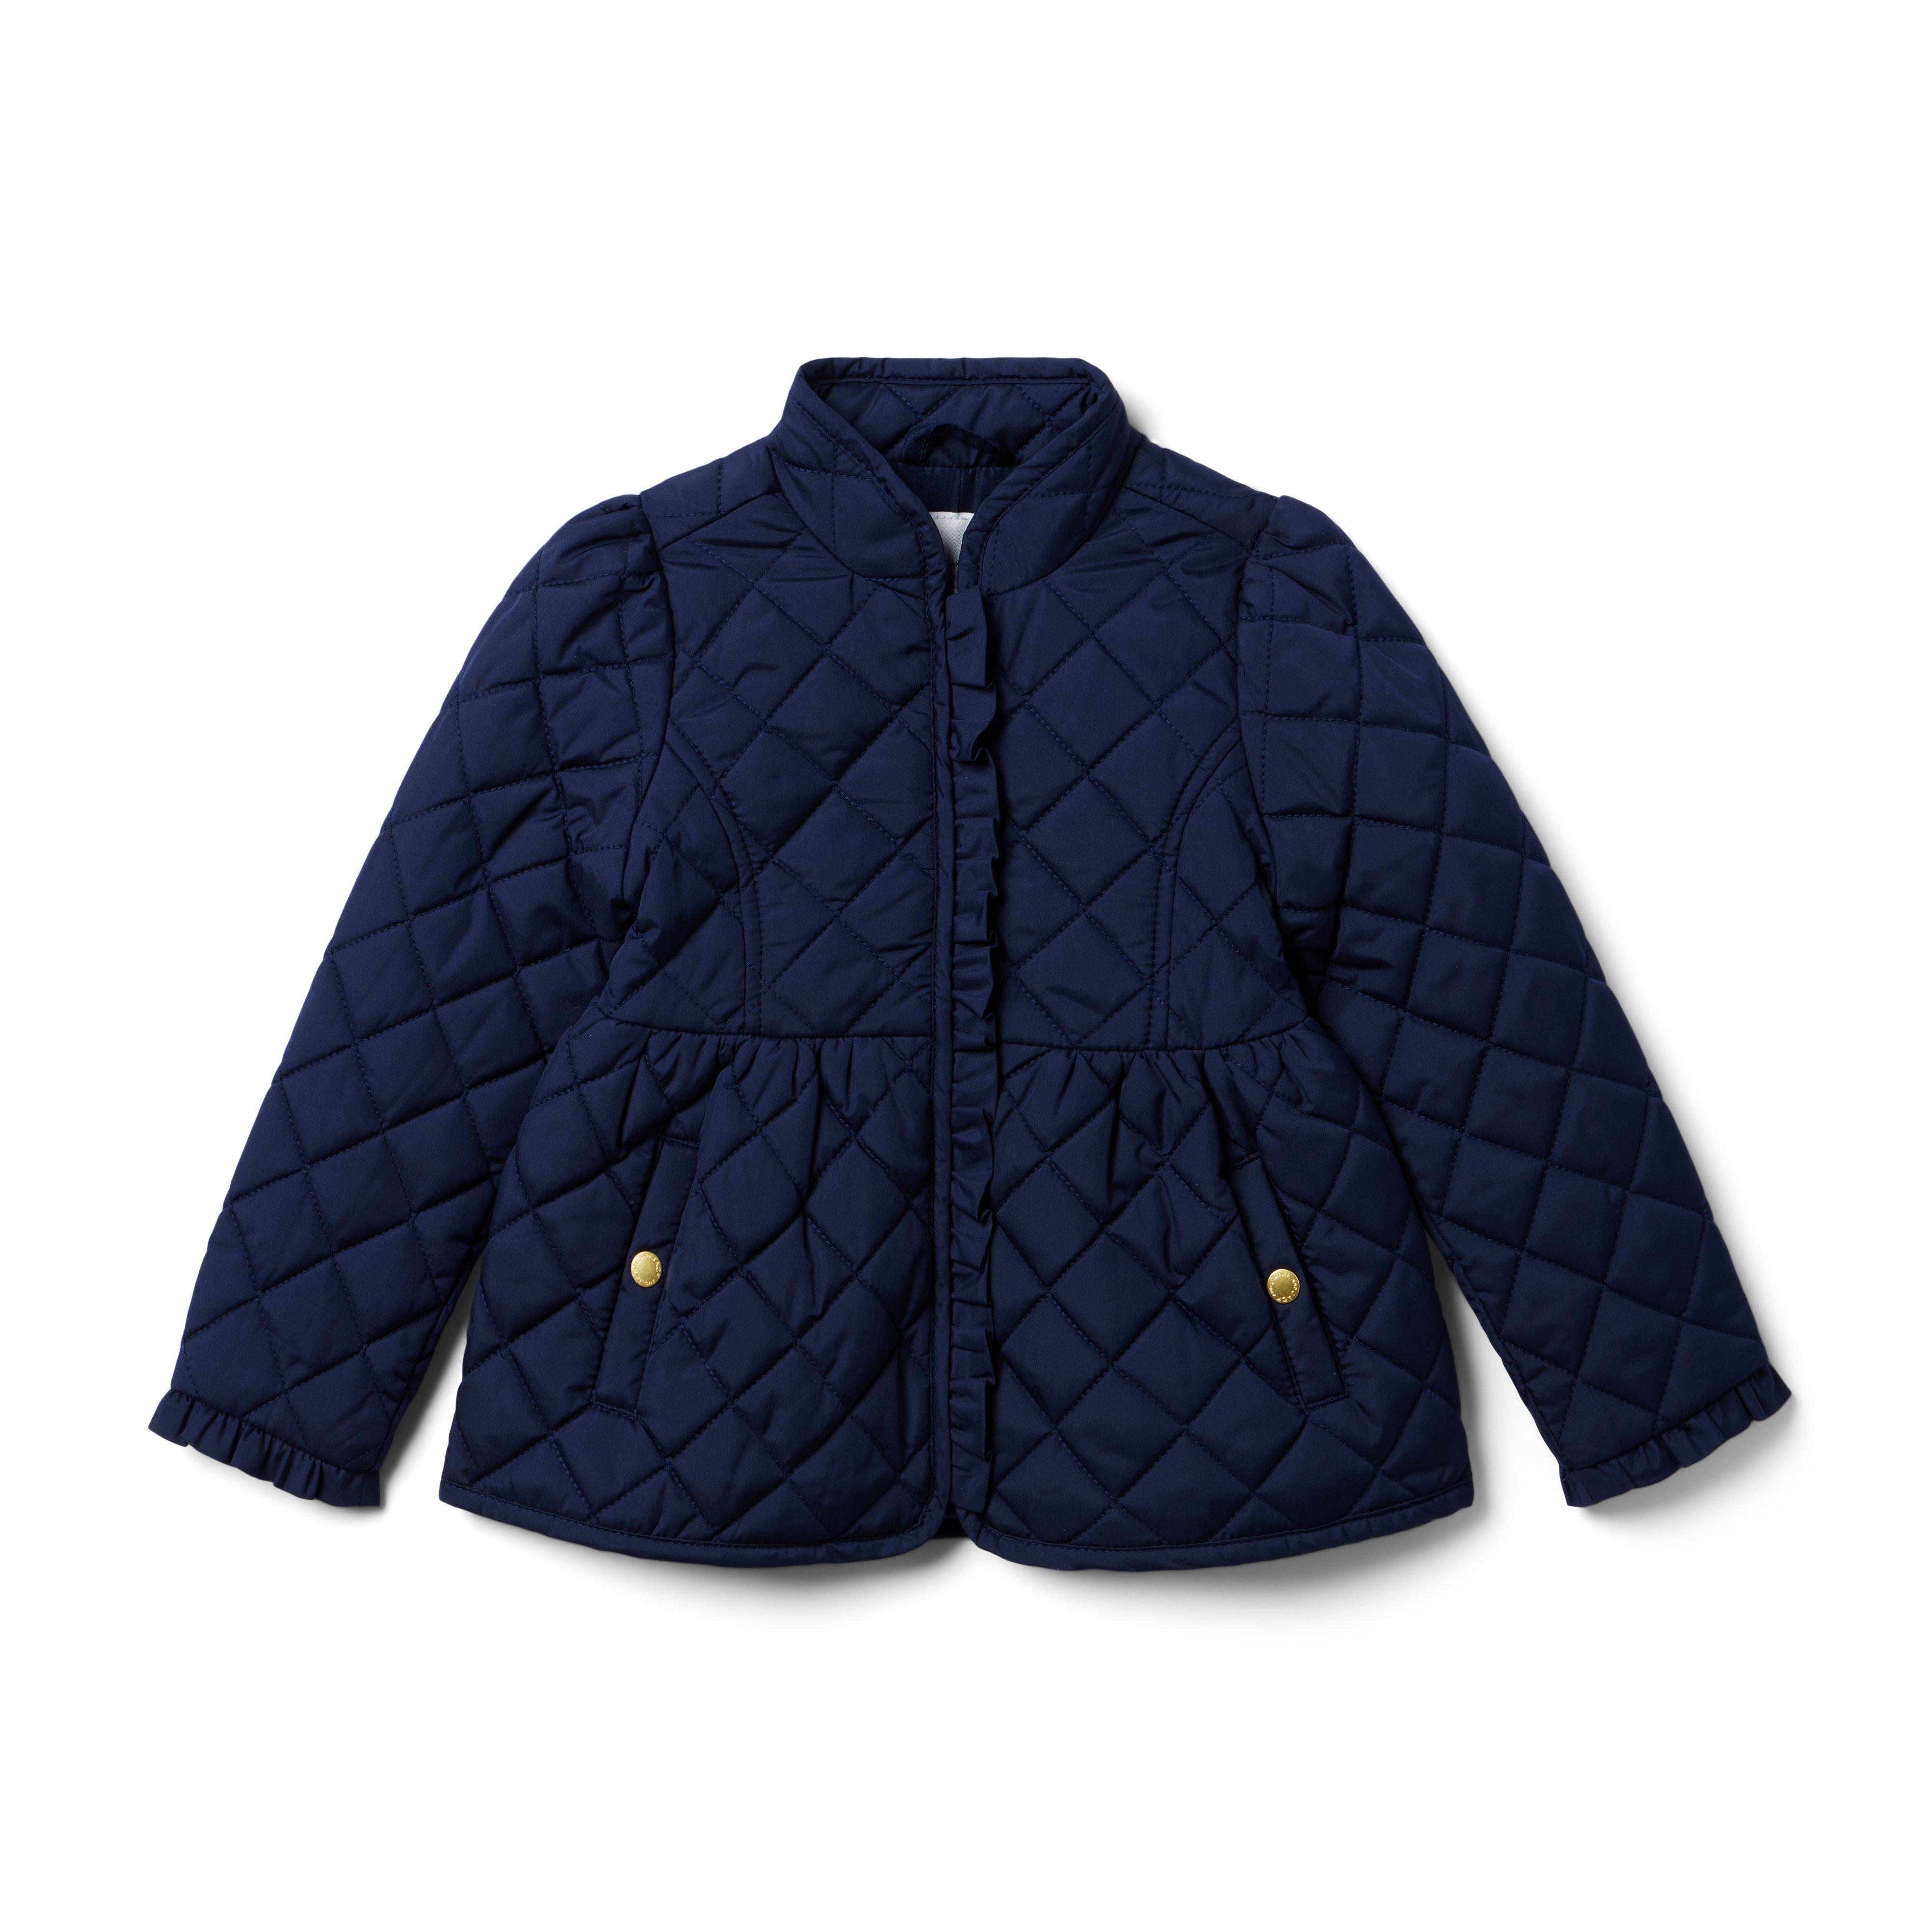 The Quilted Barn Coat